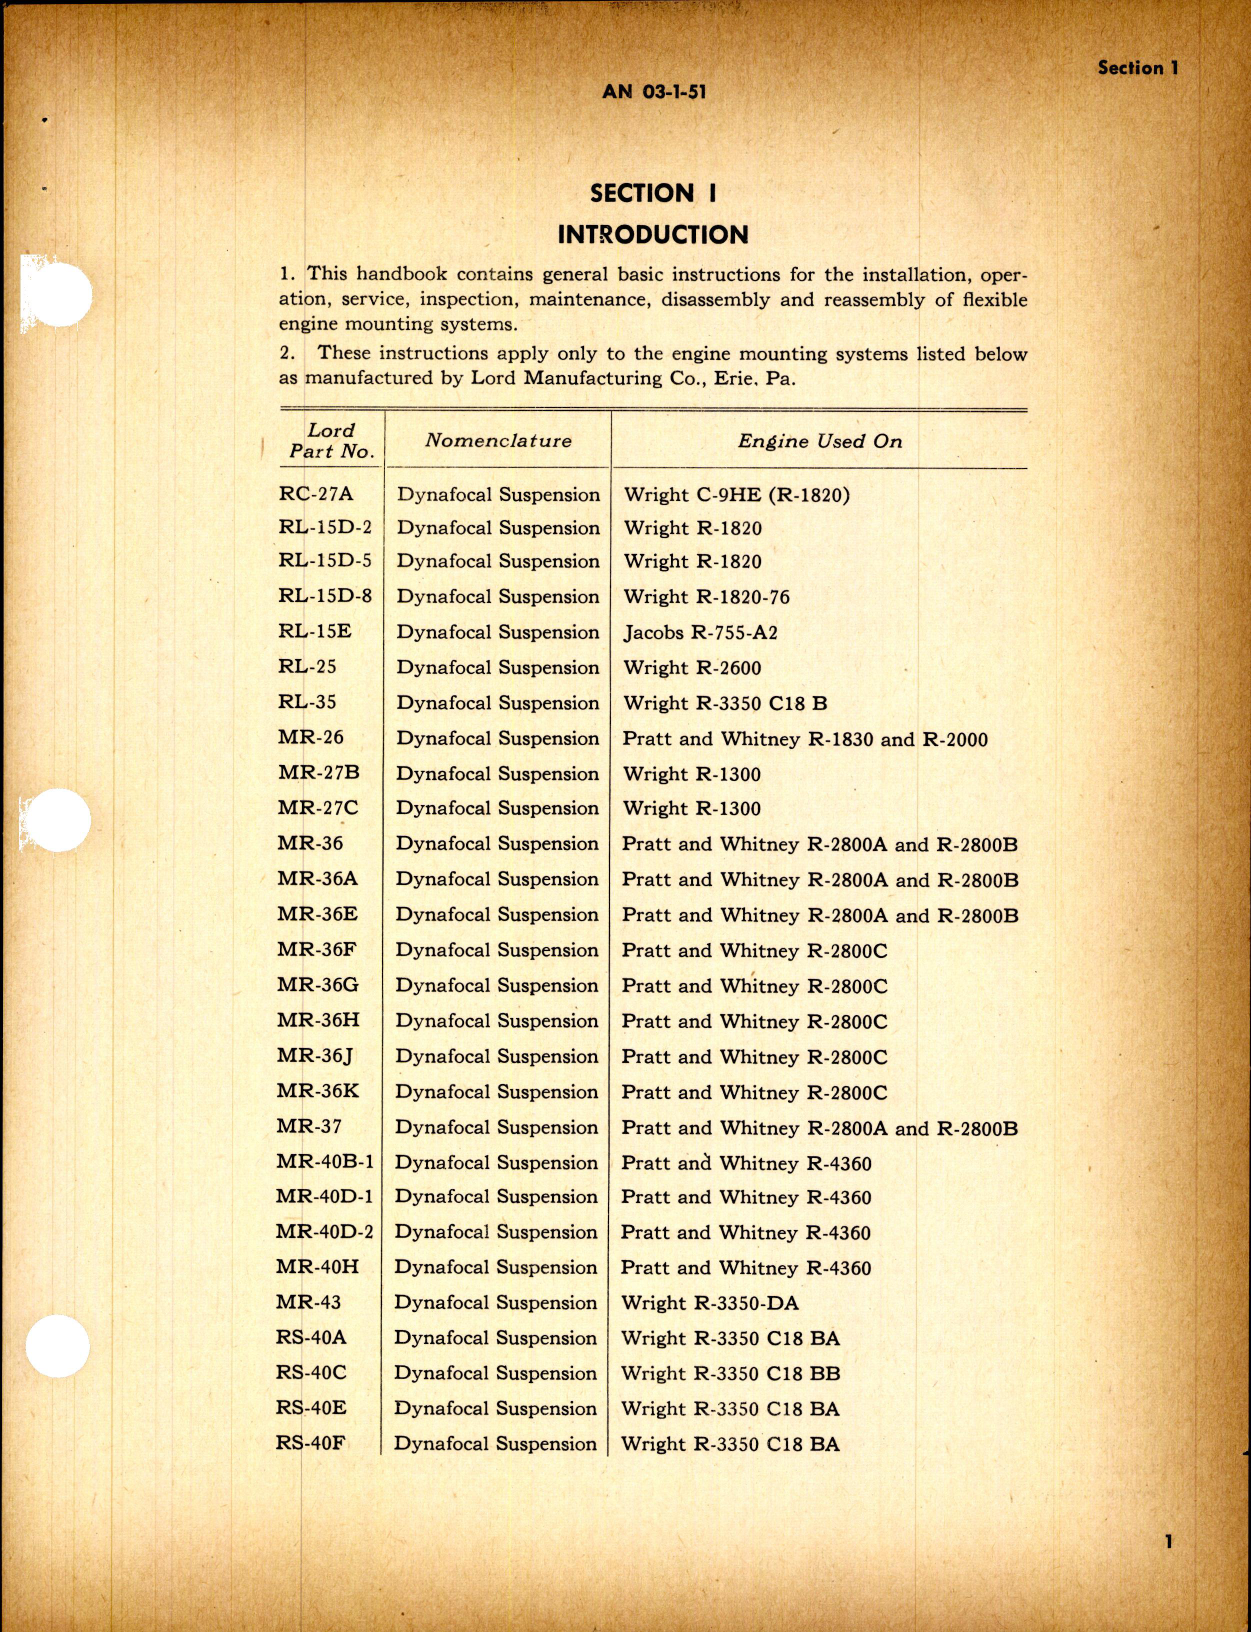 Sample page 5 from AirCorps Library document: Operation, Service, and Overhaul Instructions with Parts Catalog for Engine Mounting Systems